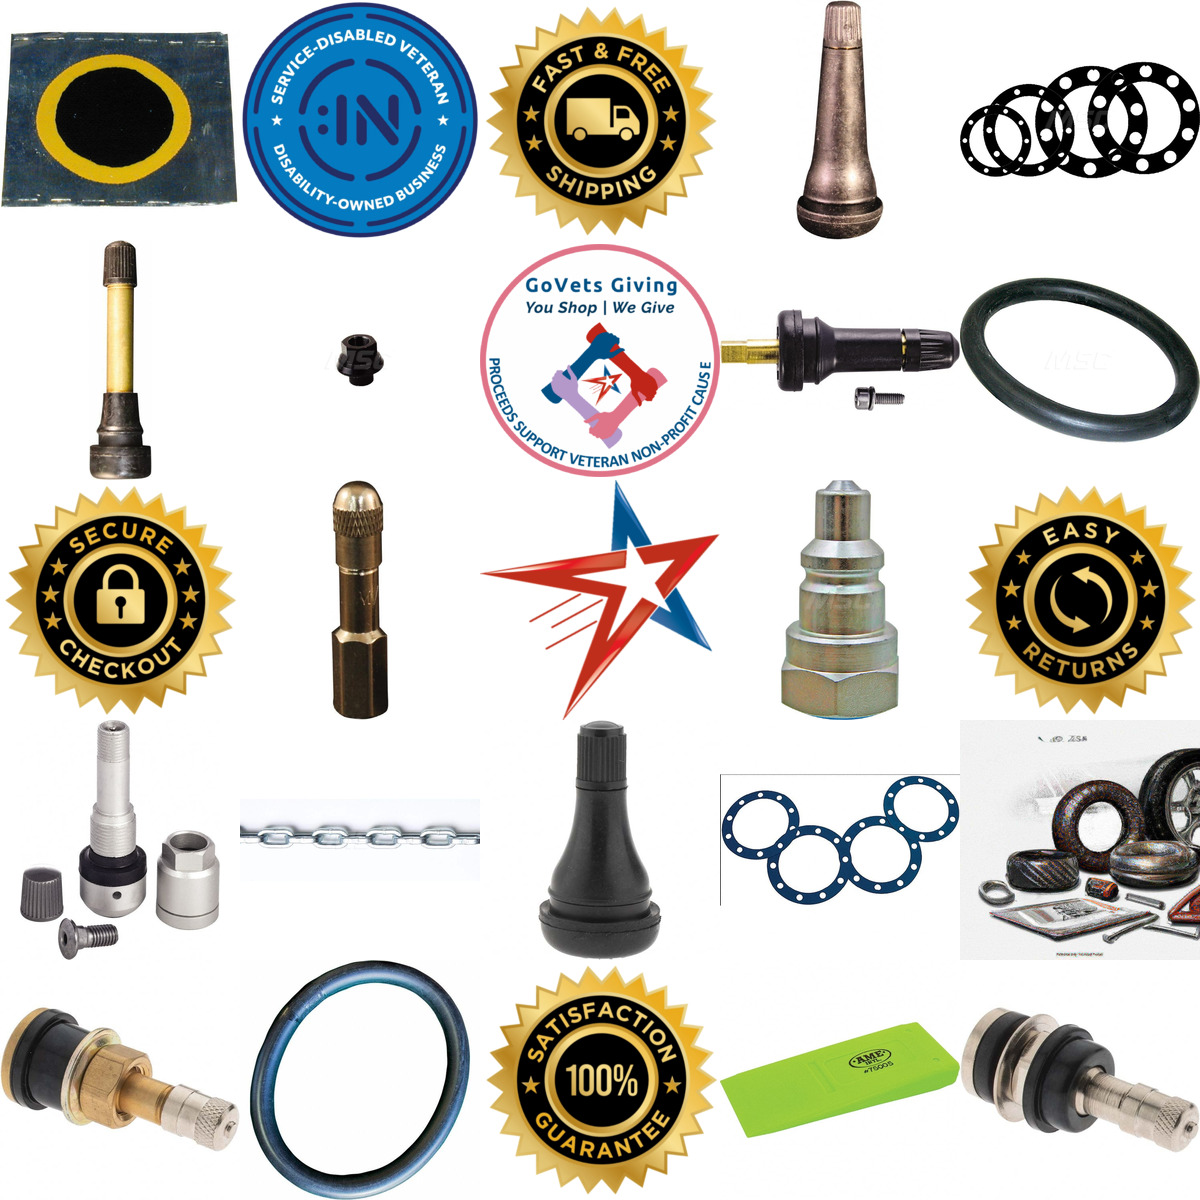 A selection of Tire Accessories products on GoVets